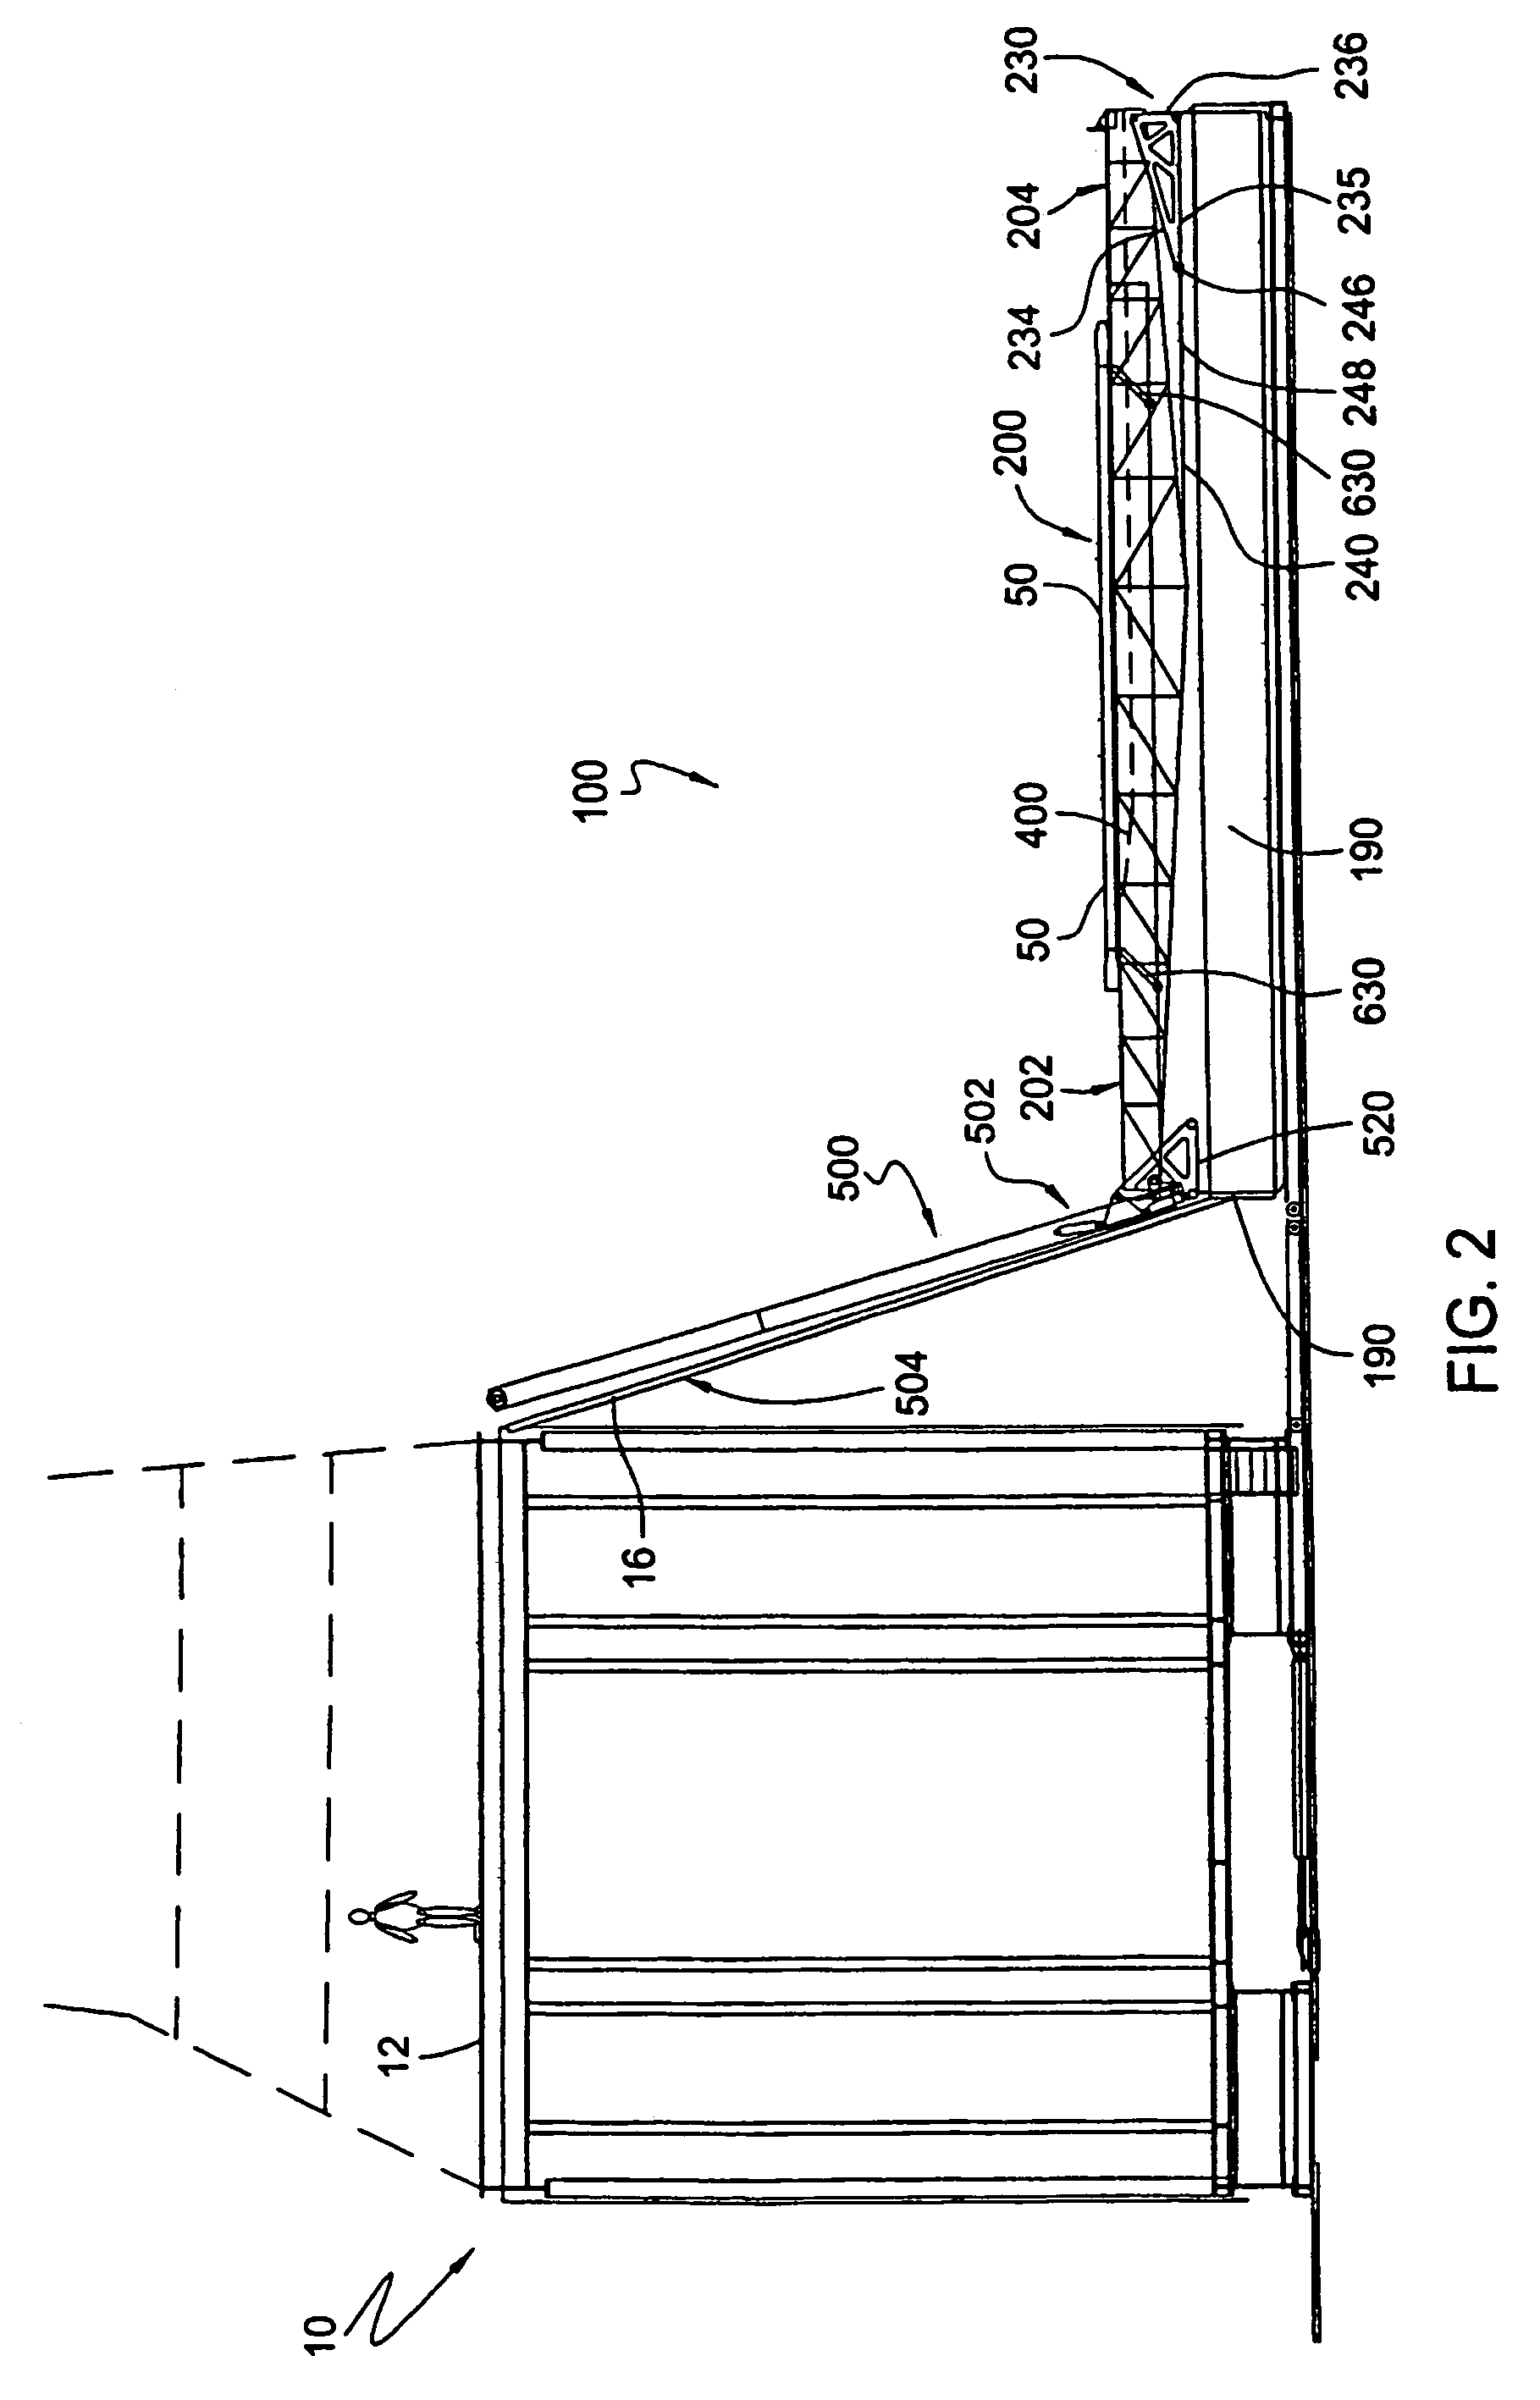 Height-adjustable pipe pick-up and laydown machine